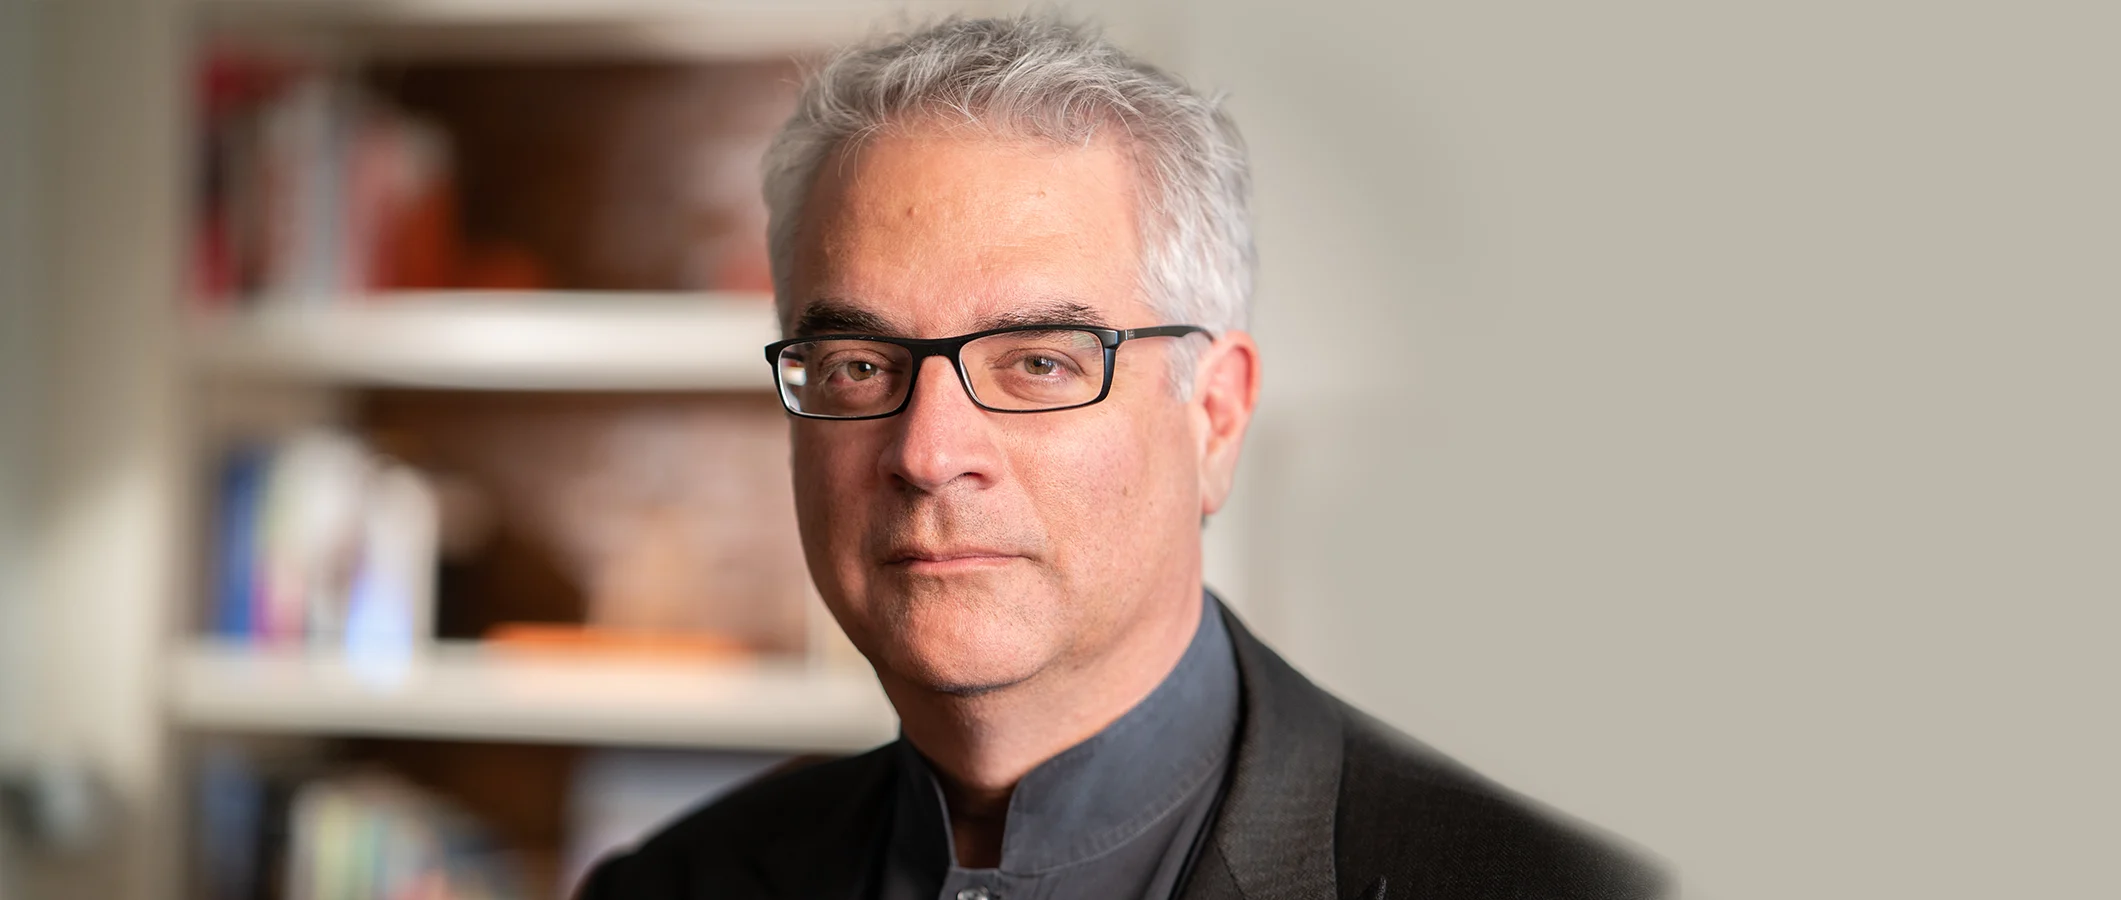 Podcast 144: Dr. Nicholas Christakis on COVID Vaccines, Booster Shots &#038; What's Next with Pandemic